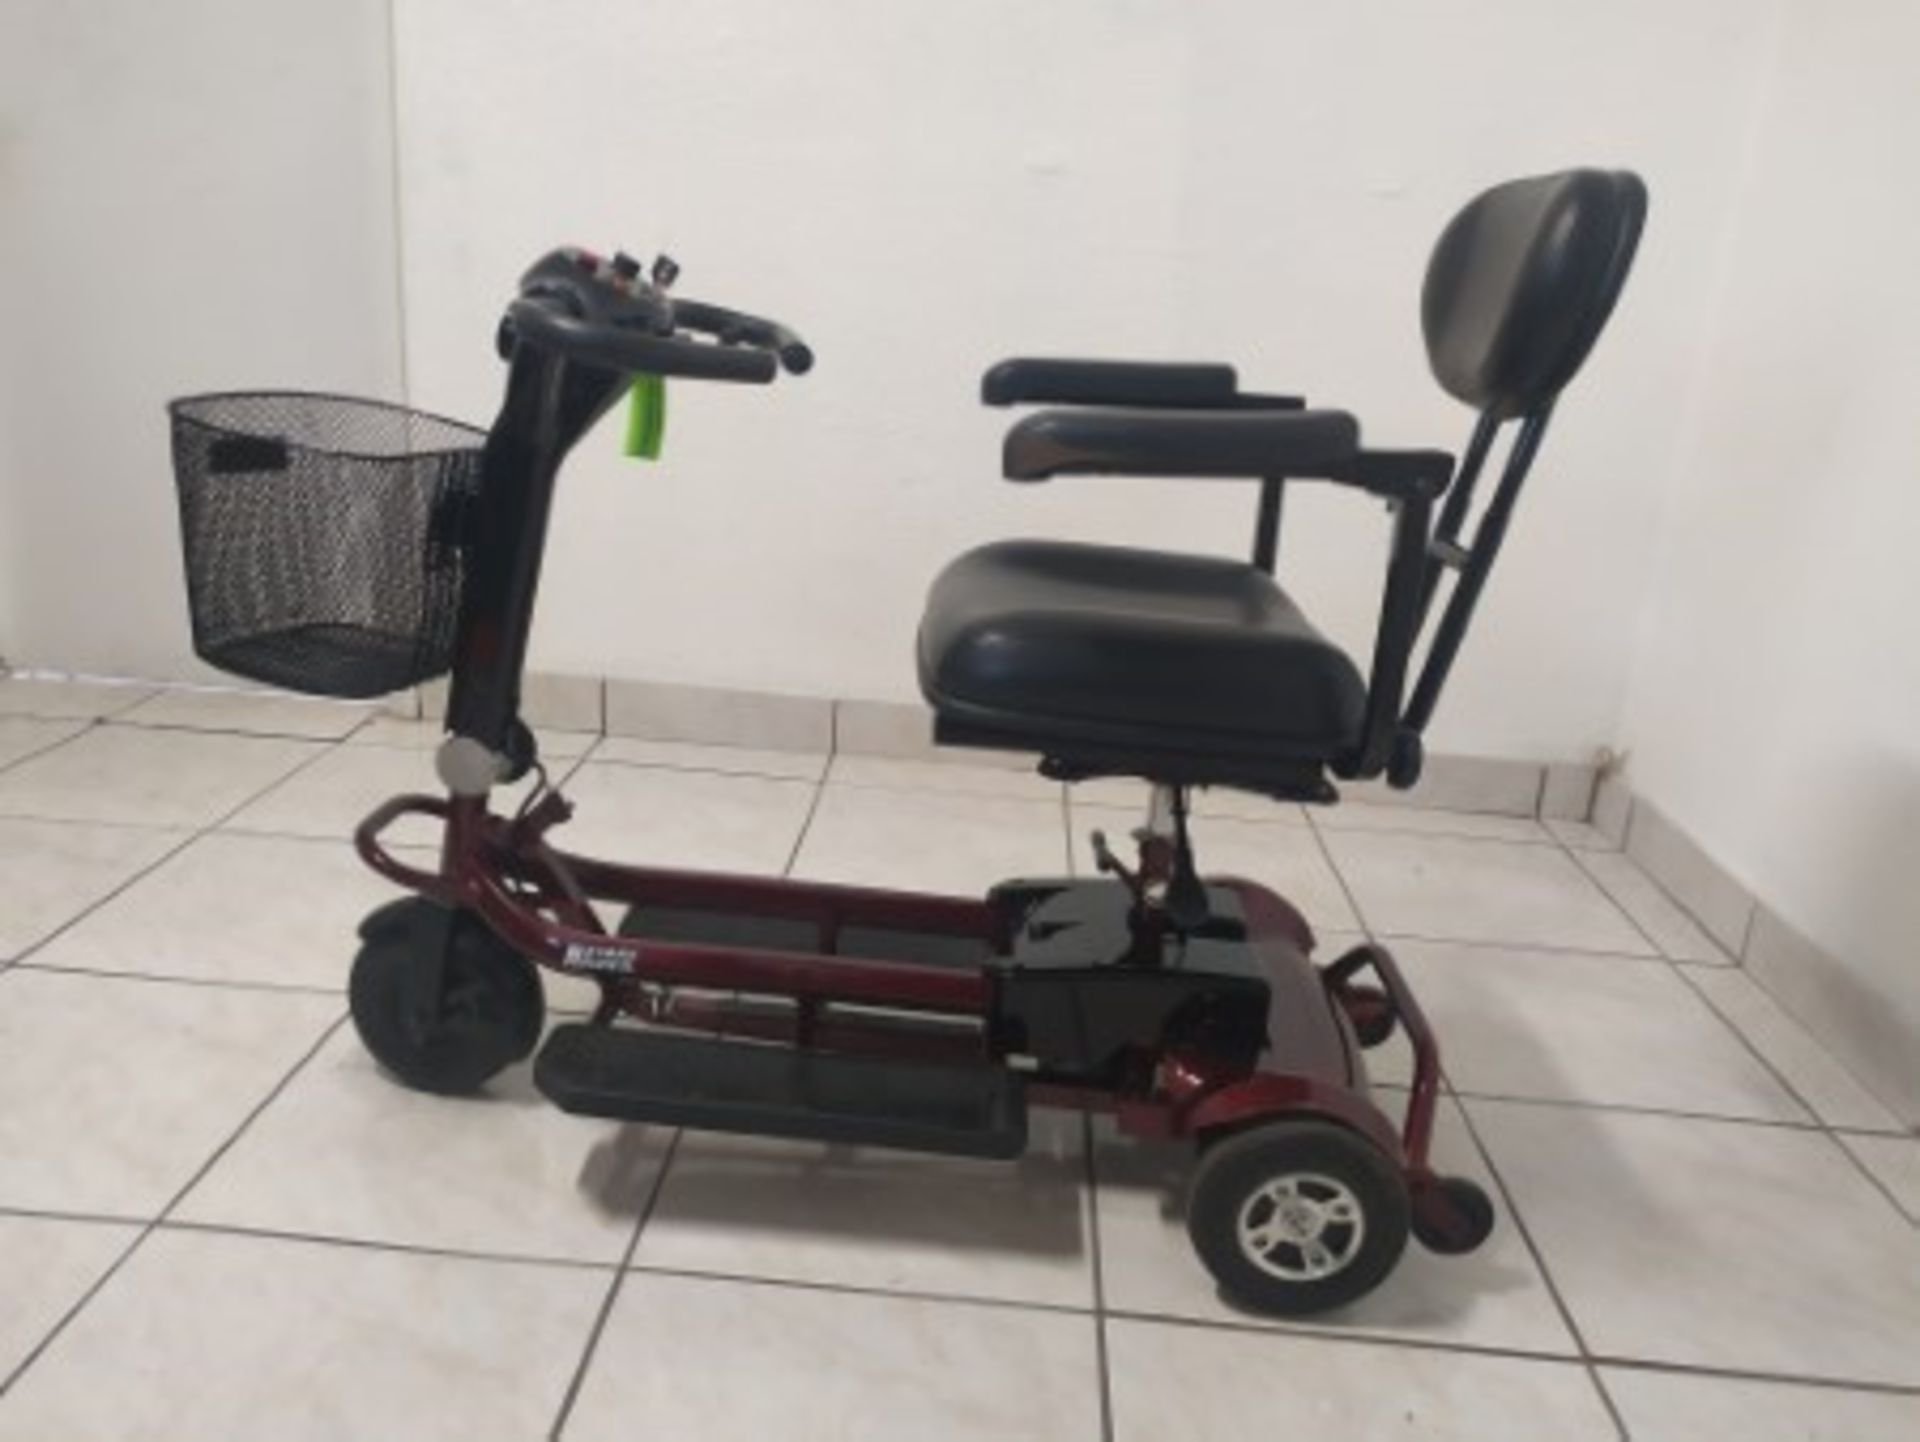 2012 DRIVE HAWK 3-WHEEL SCOOTER WITH BASKET - RED - 250LB CAPACITY - SERIAL No. 2A06090258PQ (NO CHA - Image 2 of 6